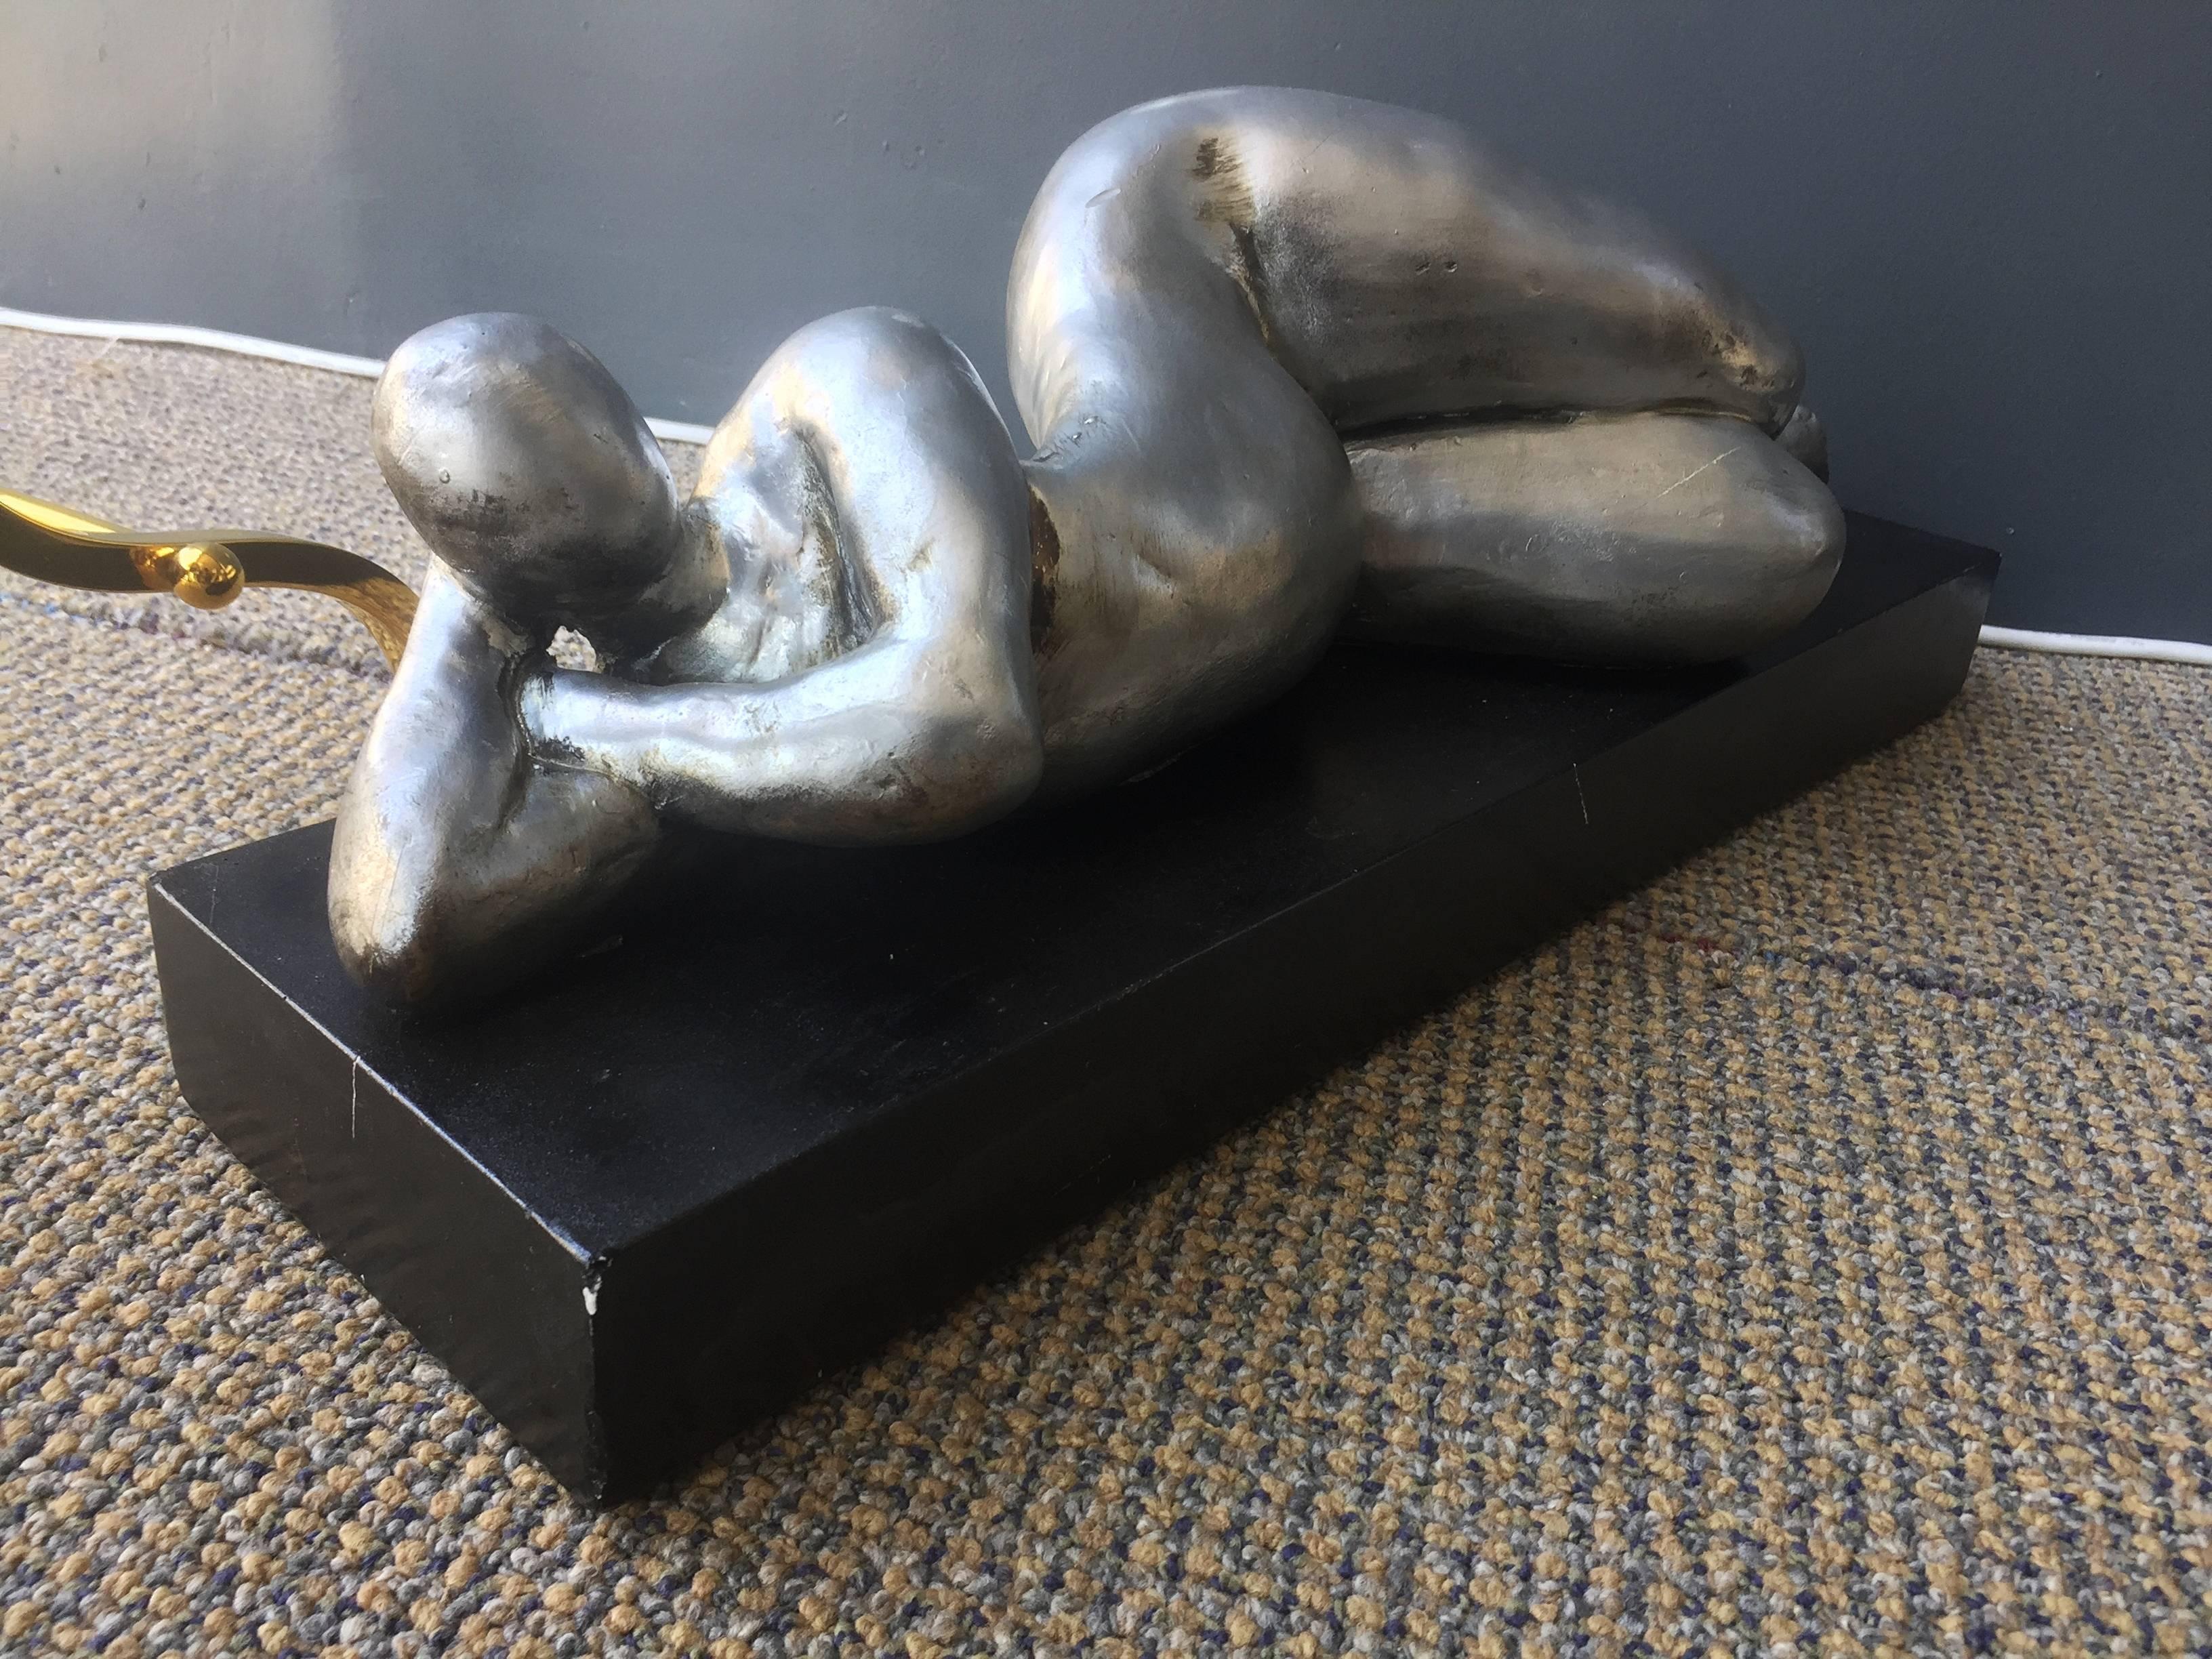 A cast stone sculpture of a human form by Attila Tivadar, from Attila’s Bay shore Art Studio in San Francisco. This piece depicts a female figure with exaggerated curves lying on the side with one arm resting over the chest and the other resting